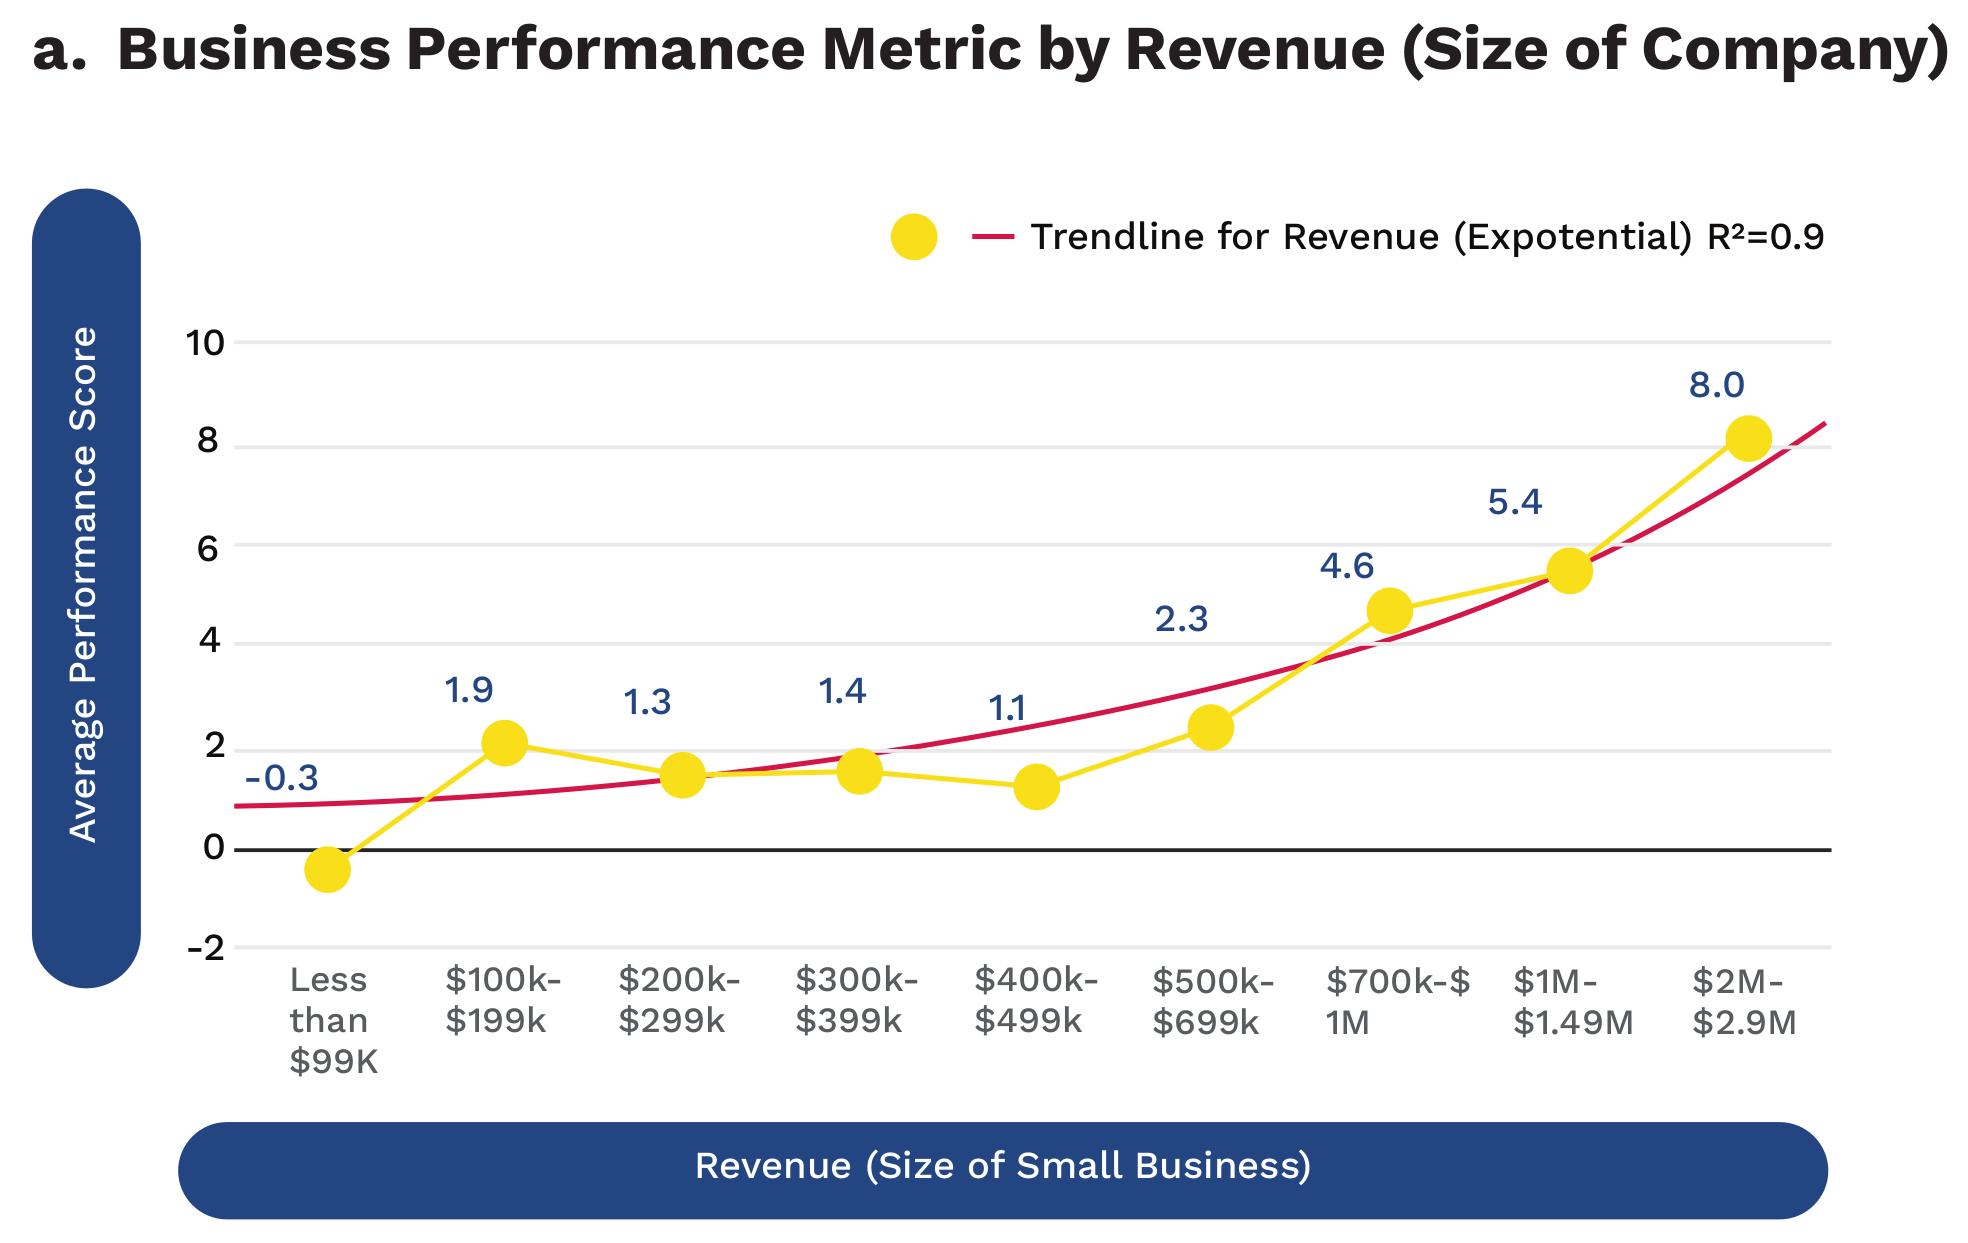 Business Performance Metric by Revenue